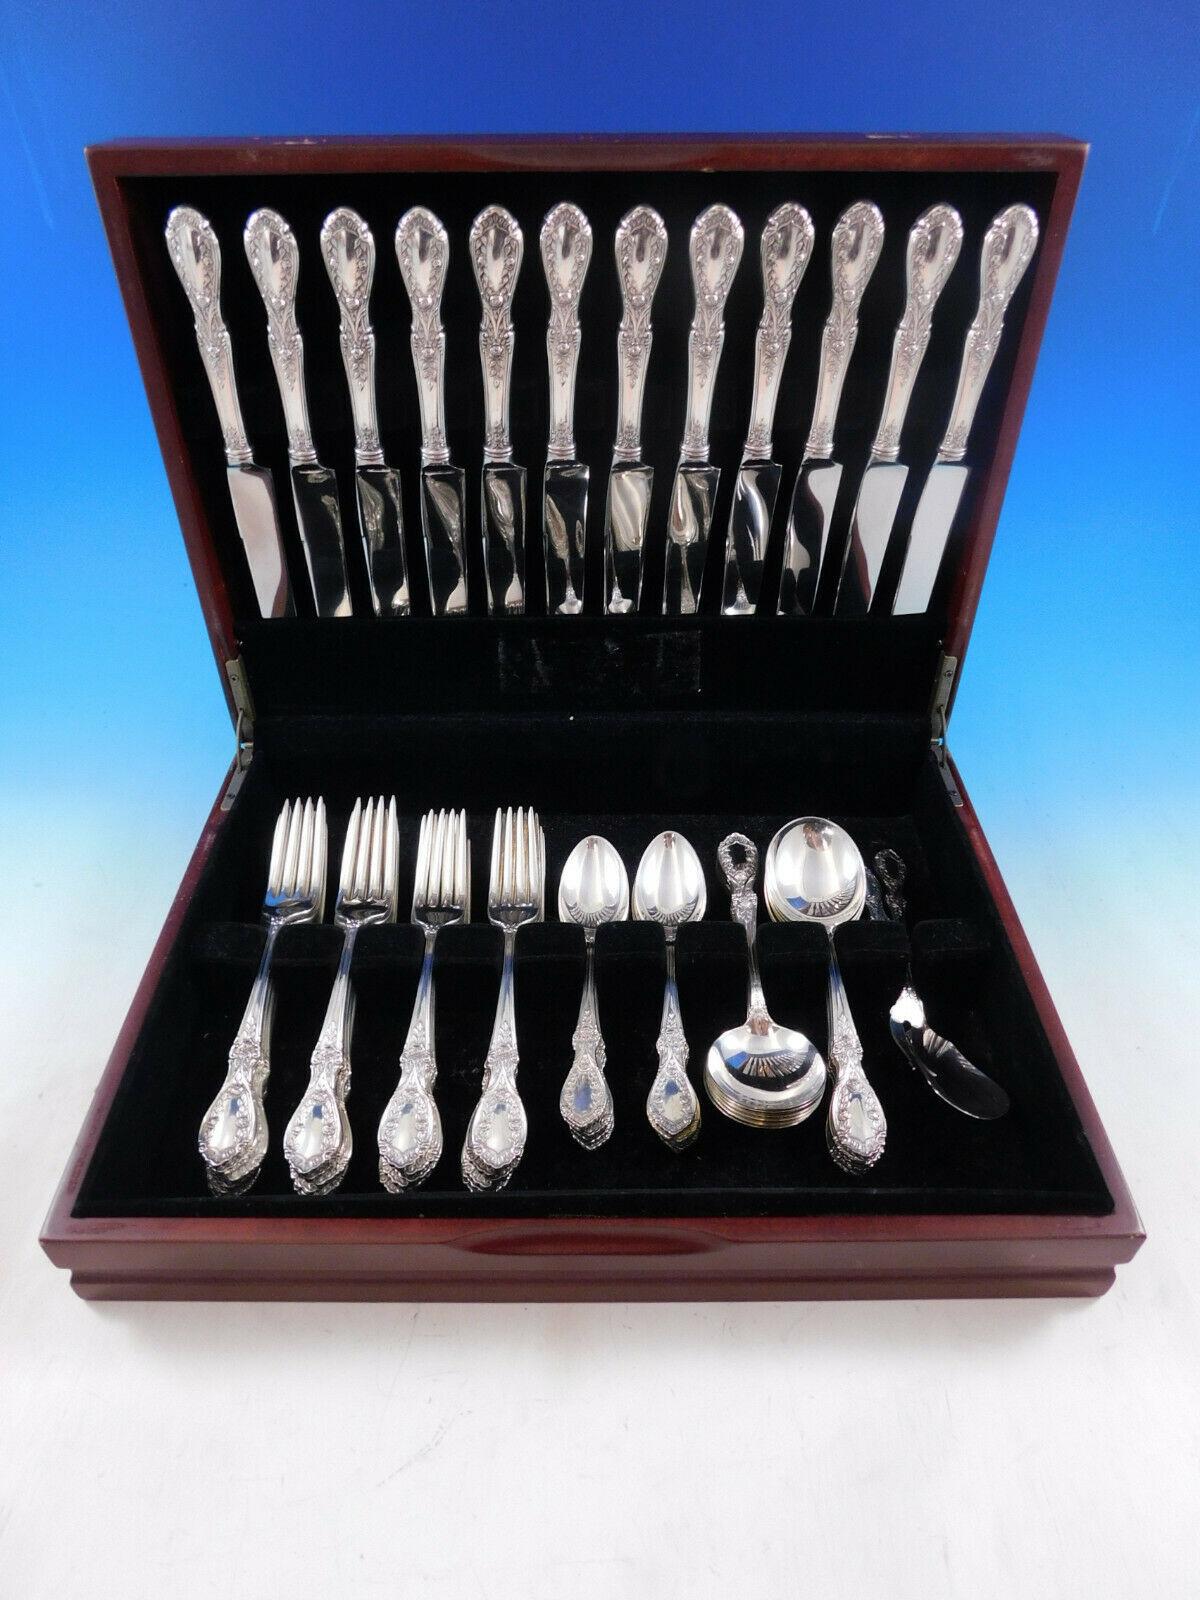 Dinner size American beauty by Manchester sterling silver flatware set - 62 pieces. This set includes:

12 dinner size knives, 9 1/2